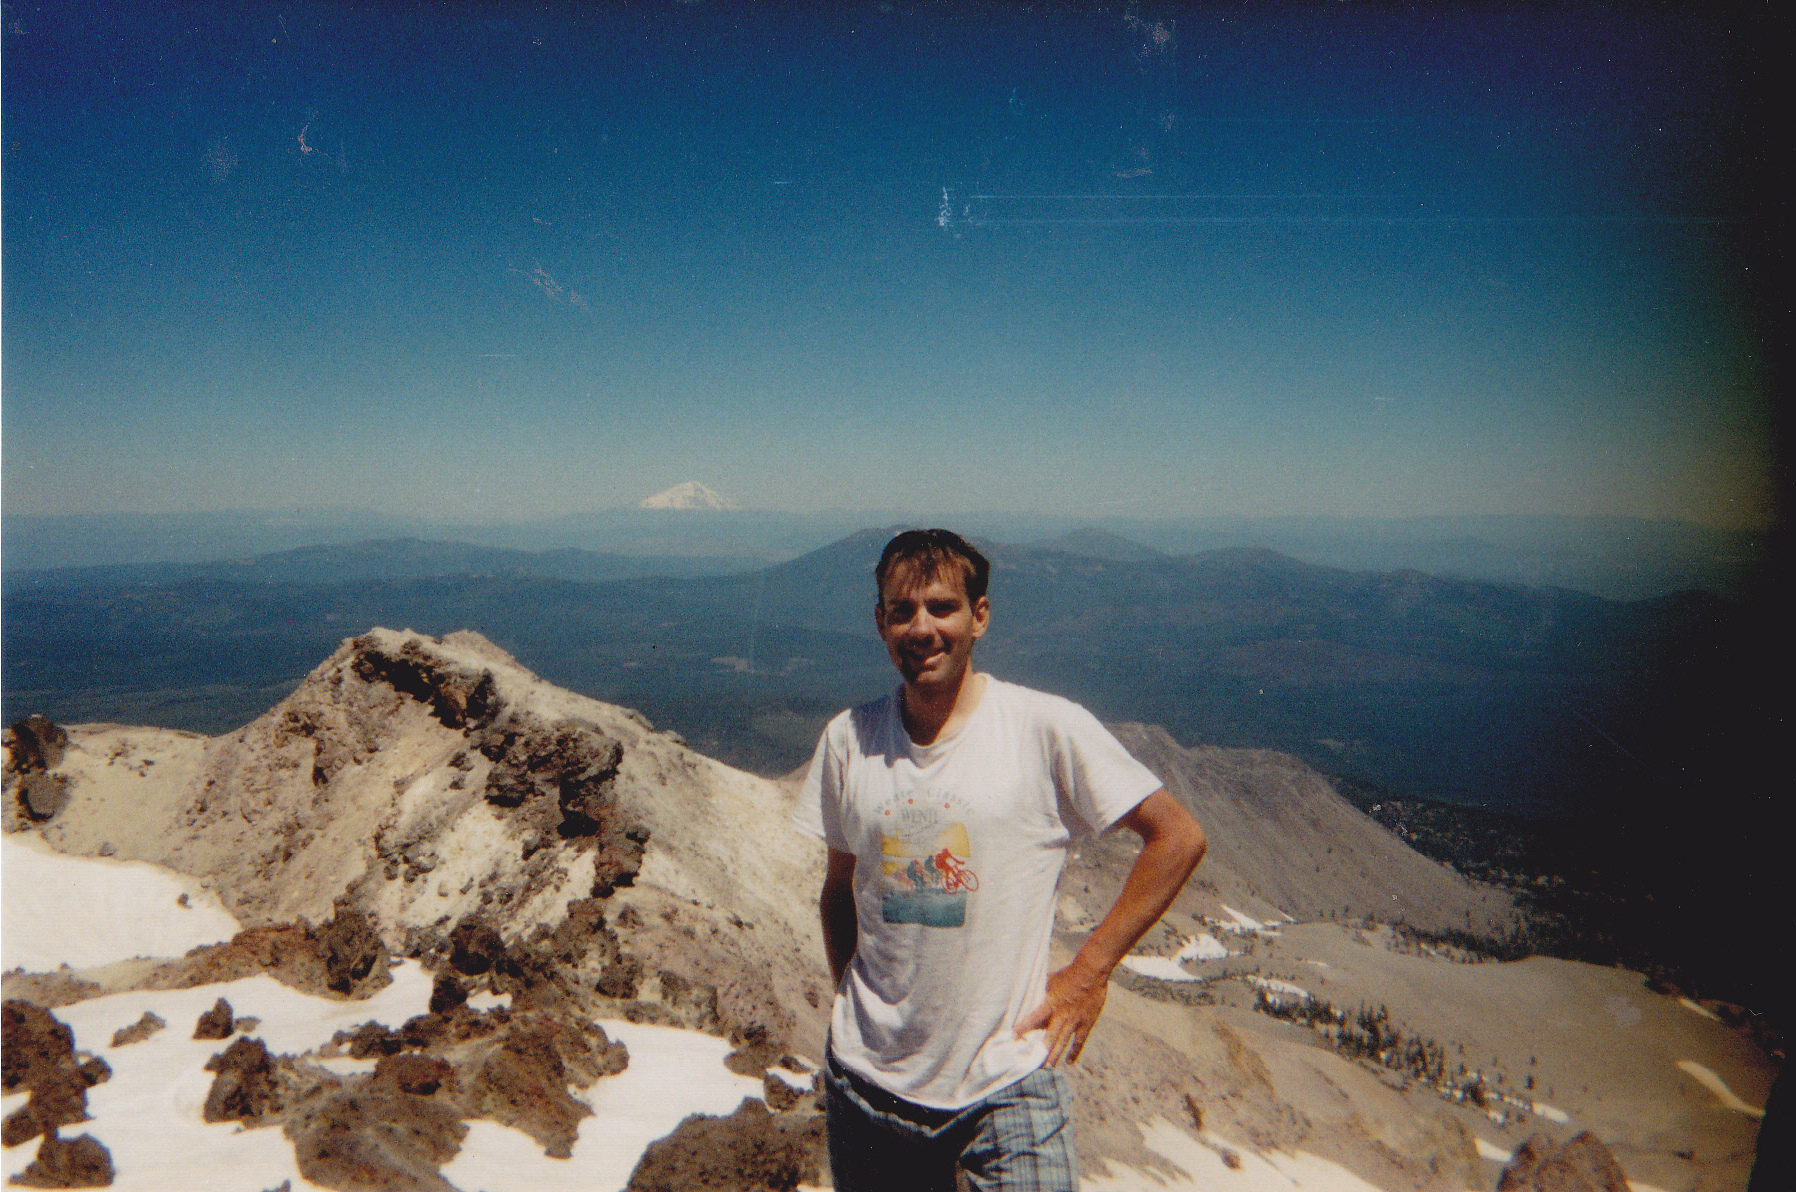  Early Velo Mountaineering mission up Mount Lassen 3190m in California during year 2000 